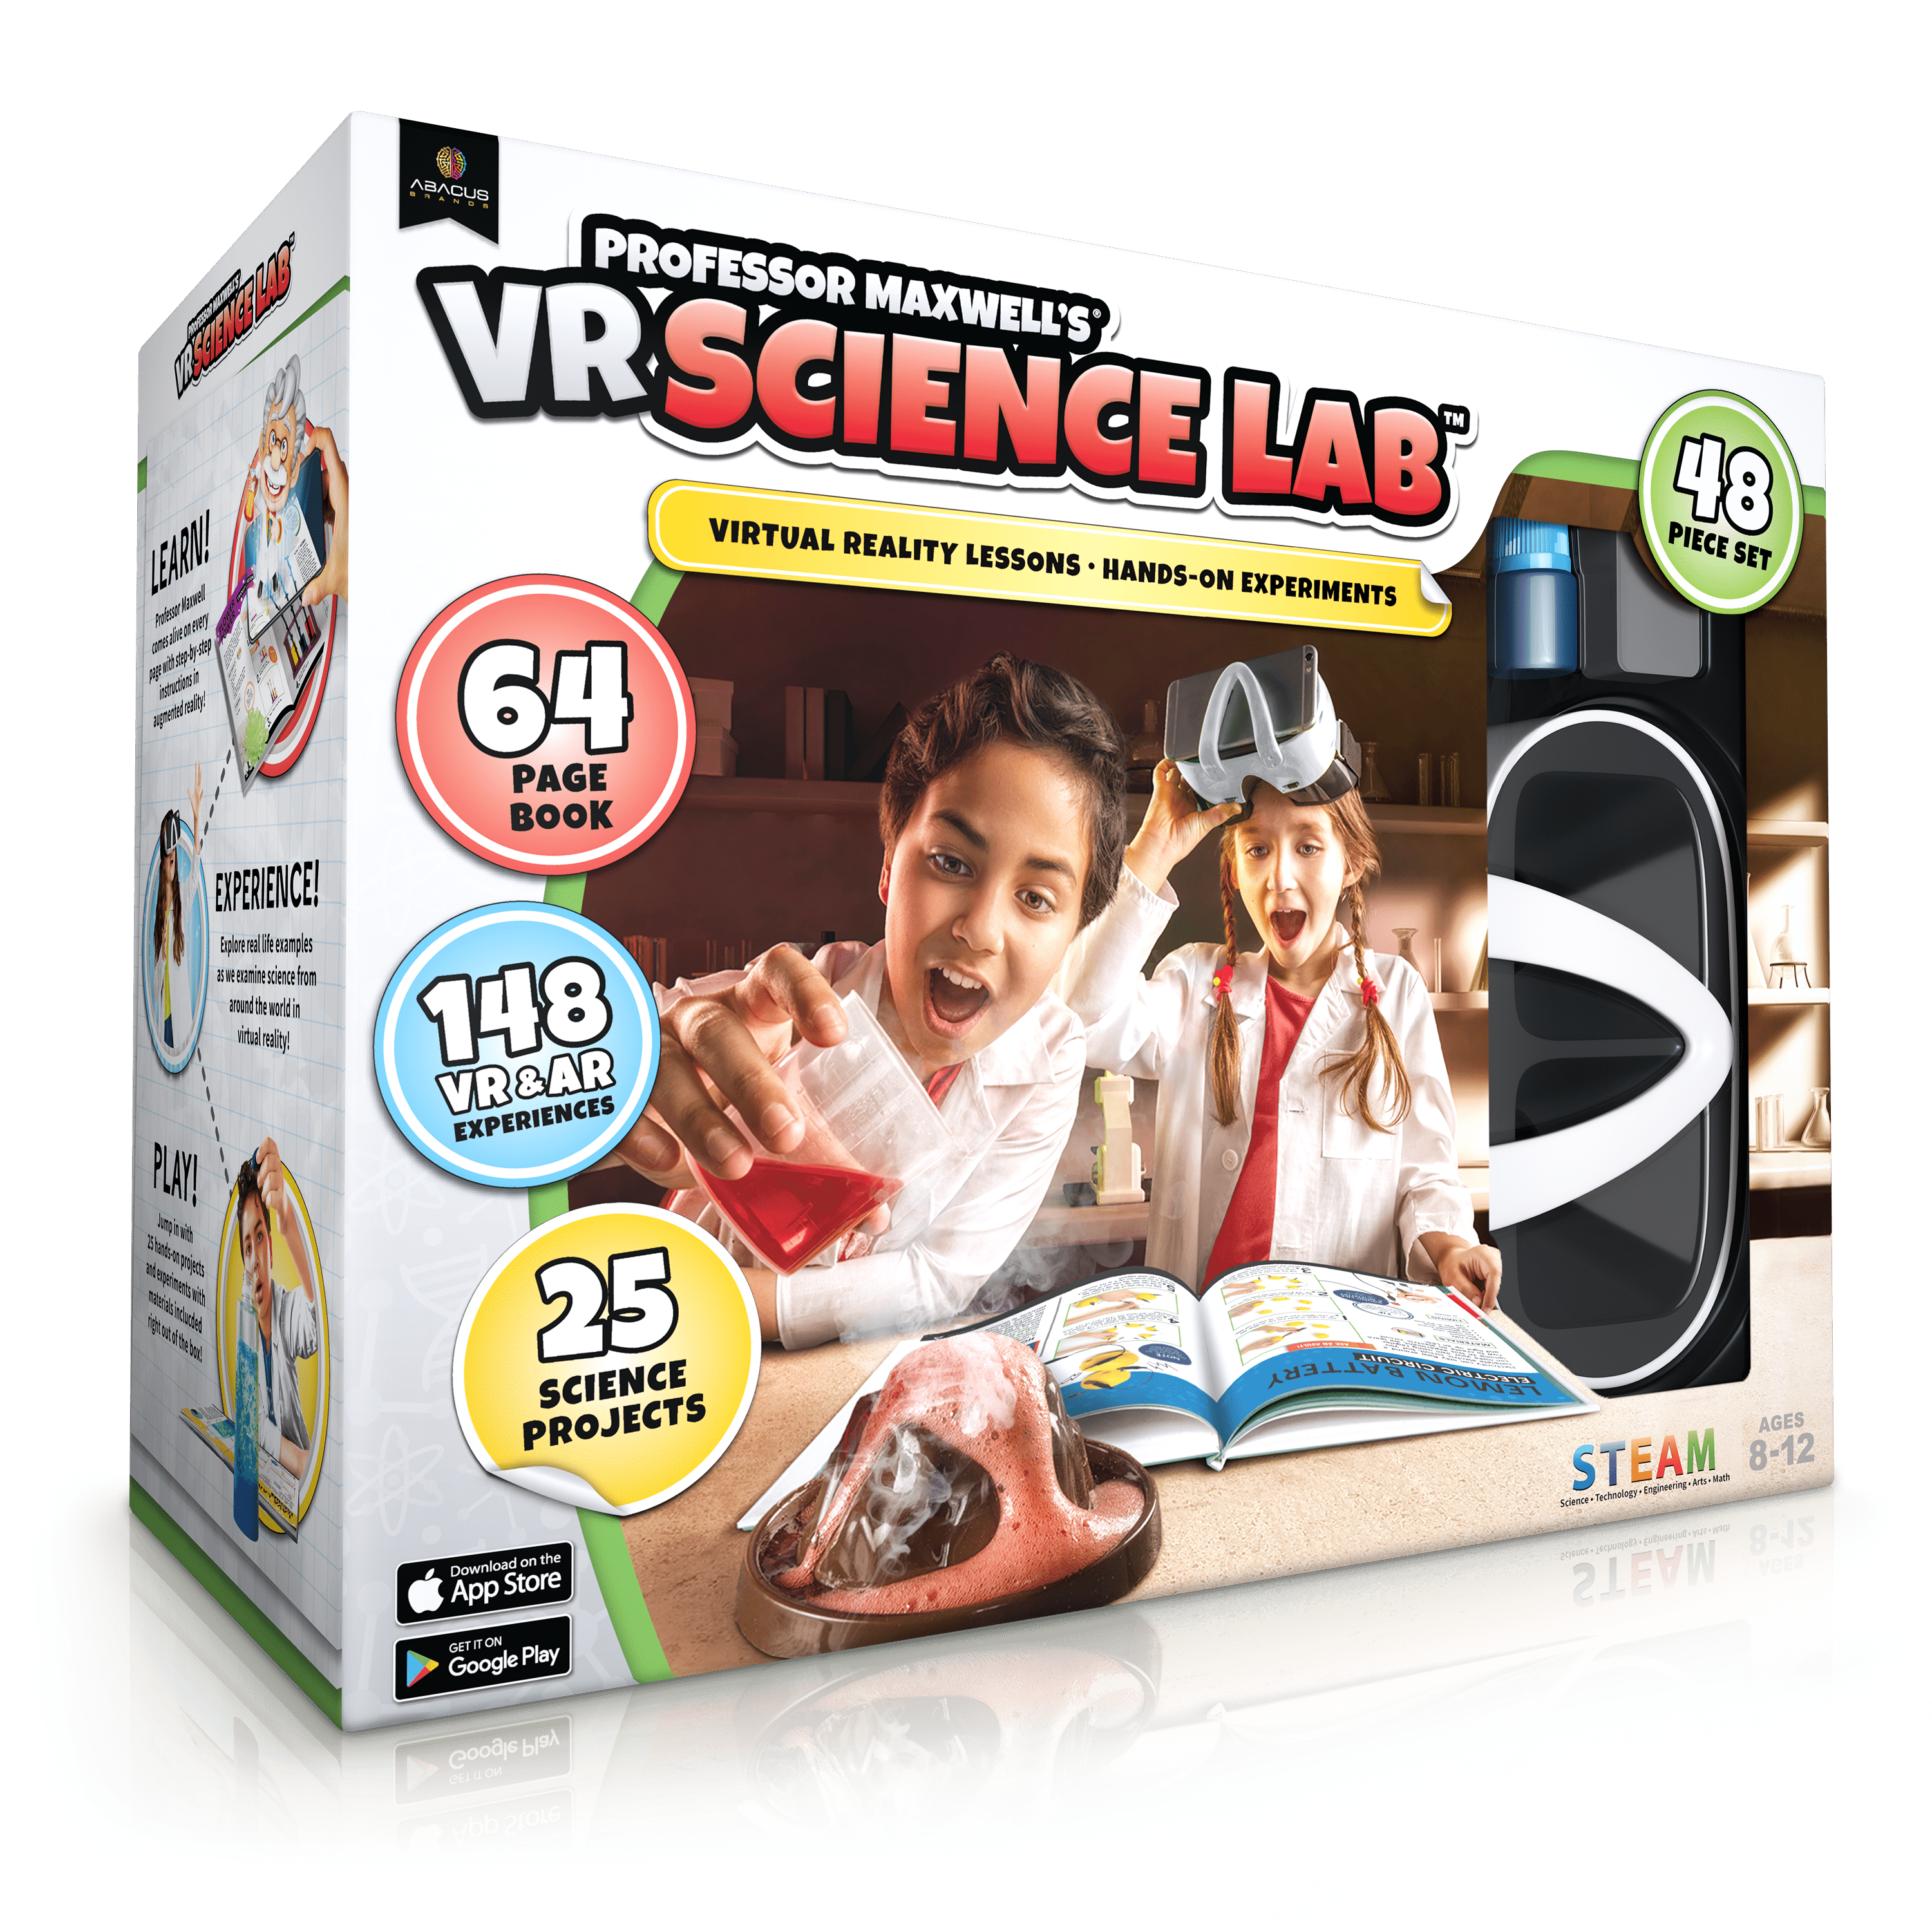 Professor Maxwell's Virtual Reality Science Kit for Kids - VR SCIENCE LAB | Educational Toy STEM